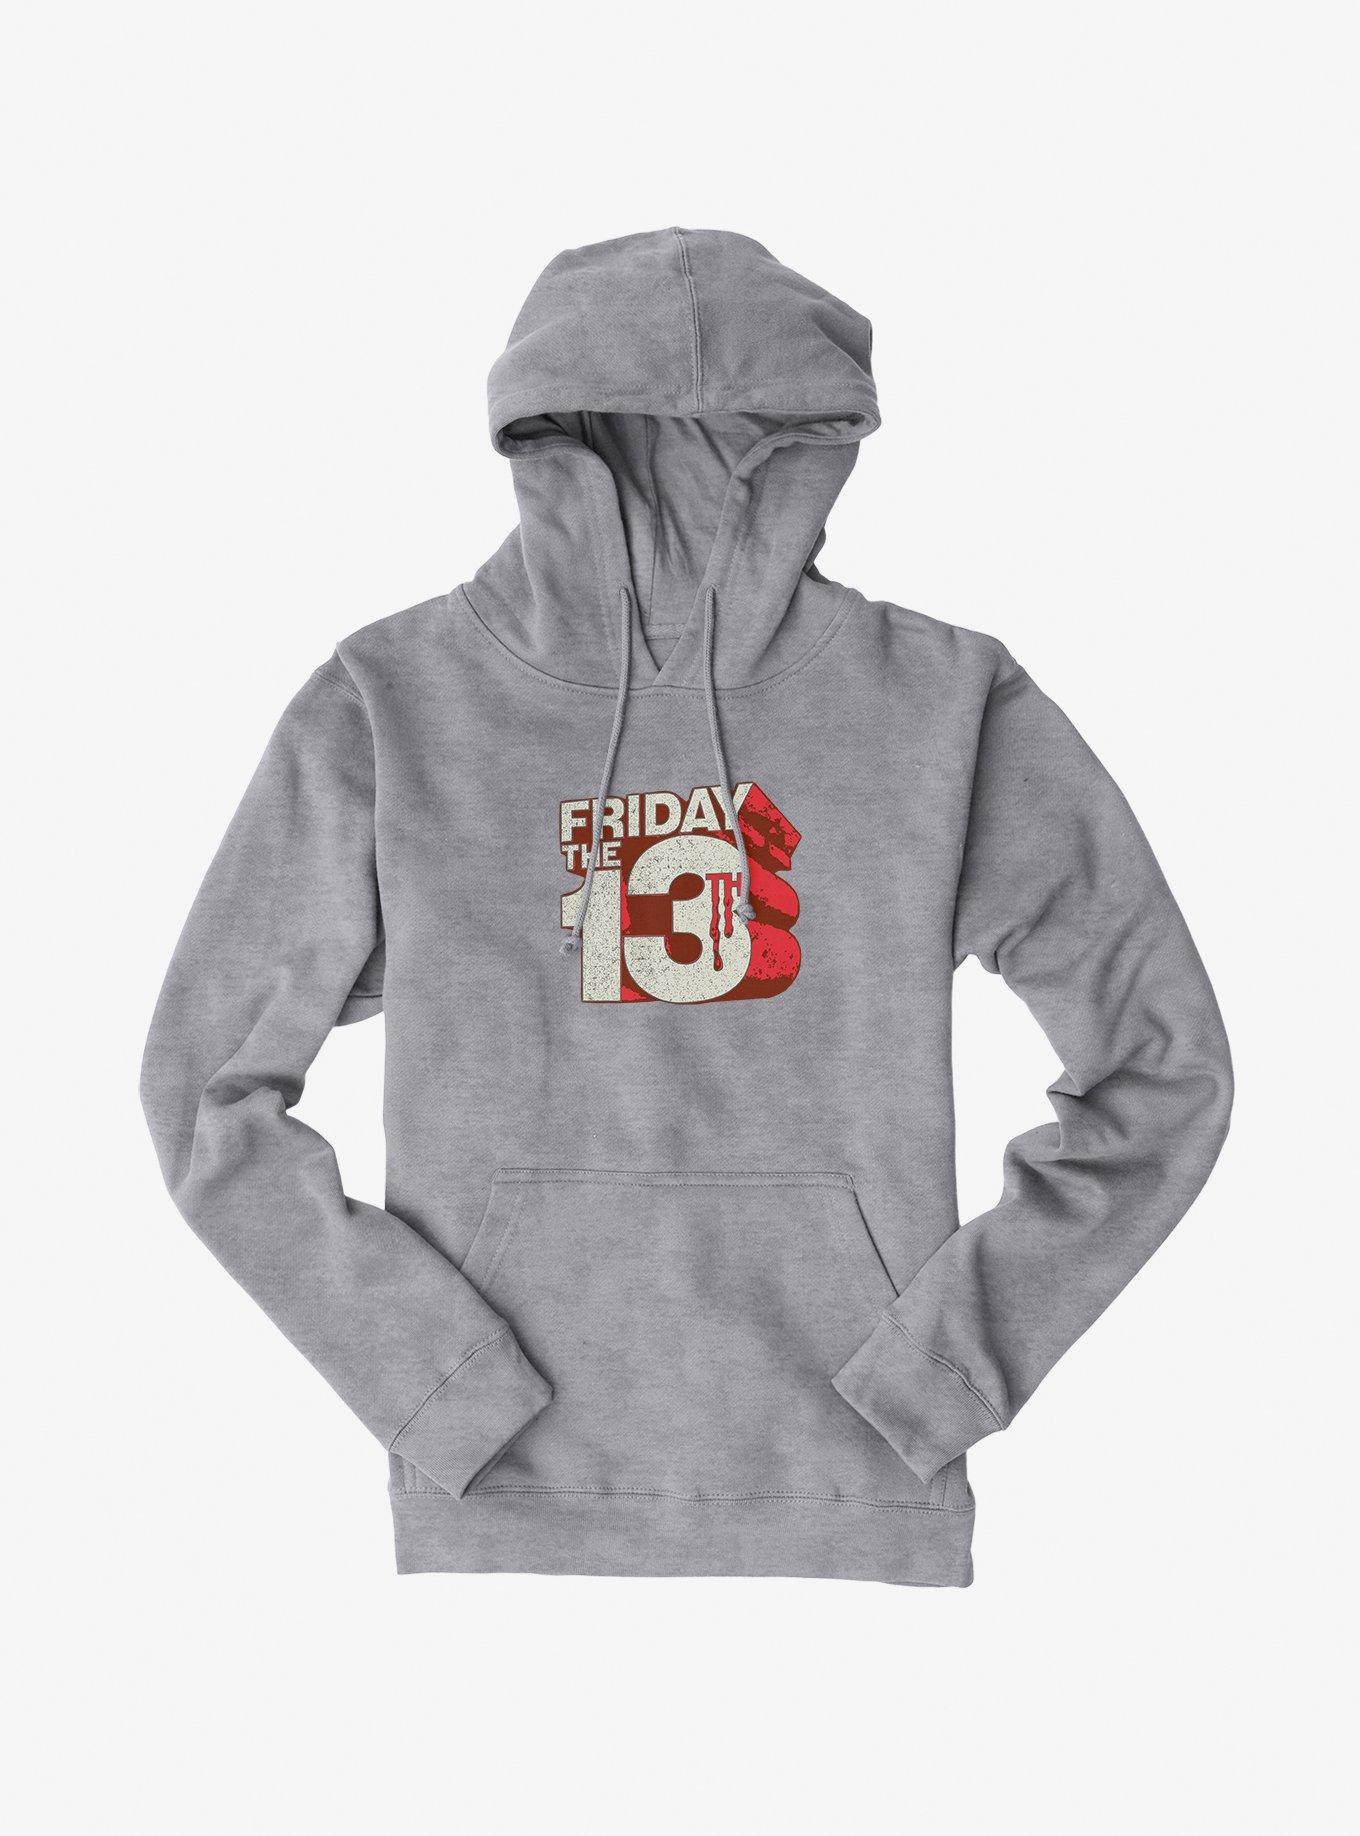 Friday The 13th Block Letters Hoodie, HEATHER GREY, hi-res